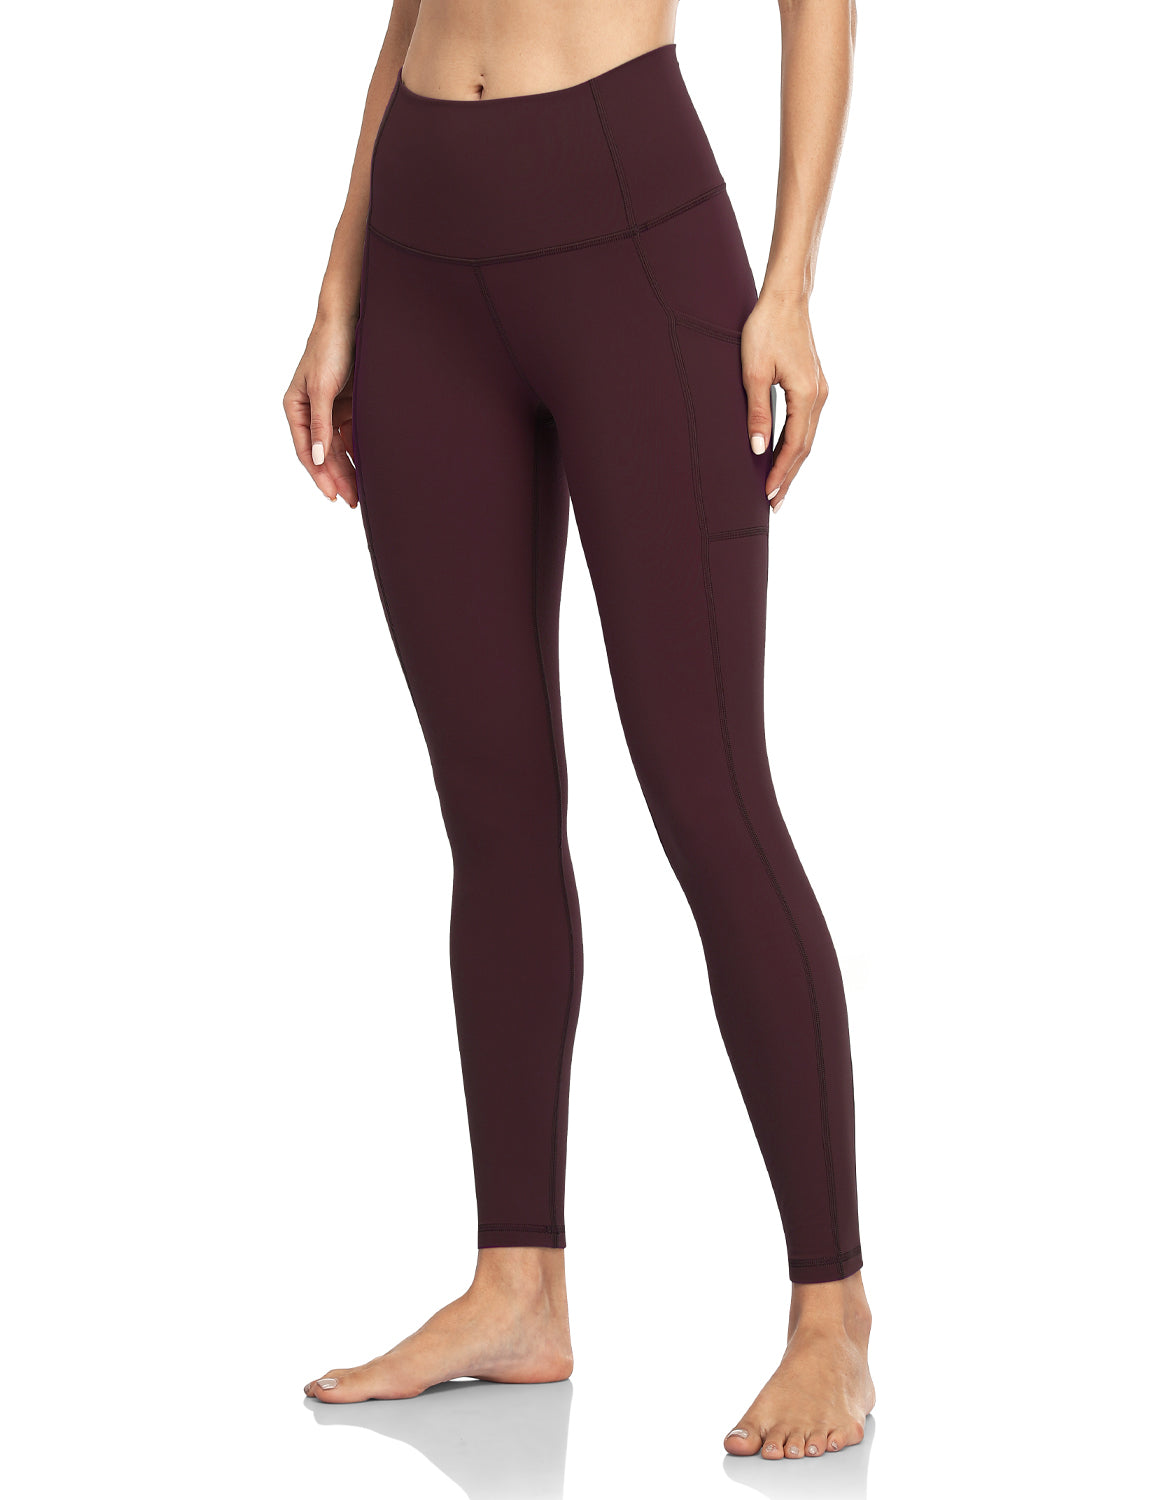  HeyNuts Pure&Plain 7/8 High Waisted Leggings for Women,  Athletic Compression Tummy Control Workout Yoga Pants 25'' Java Coffee  XXS(00) : Clothing, Shoes & Jewelry